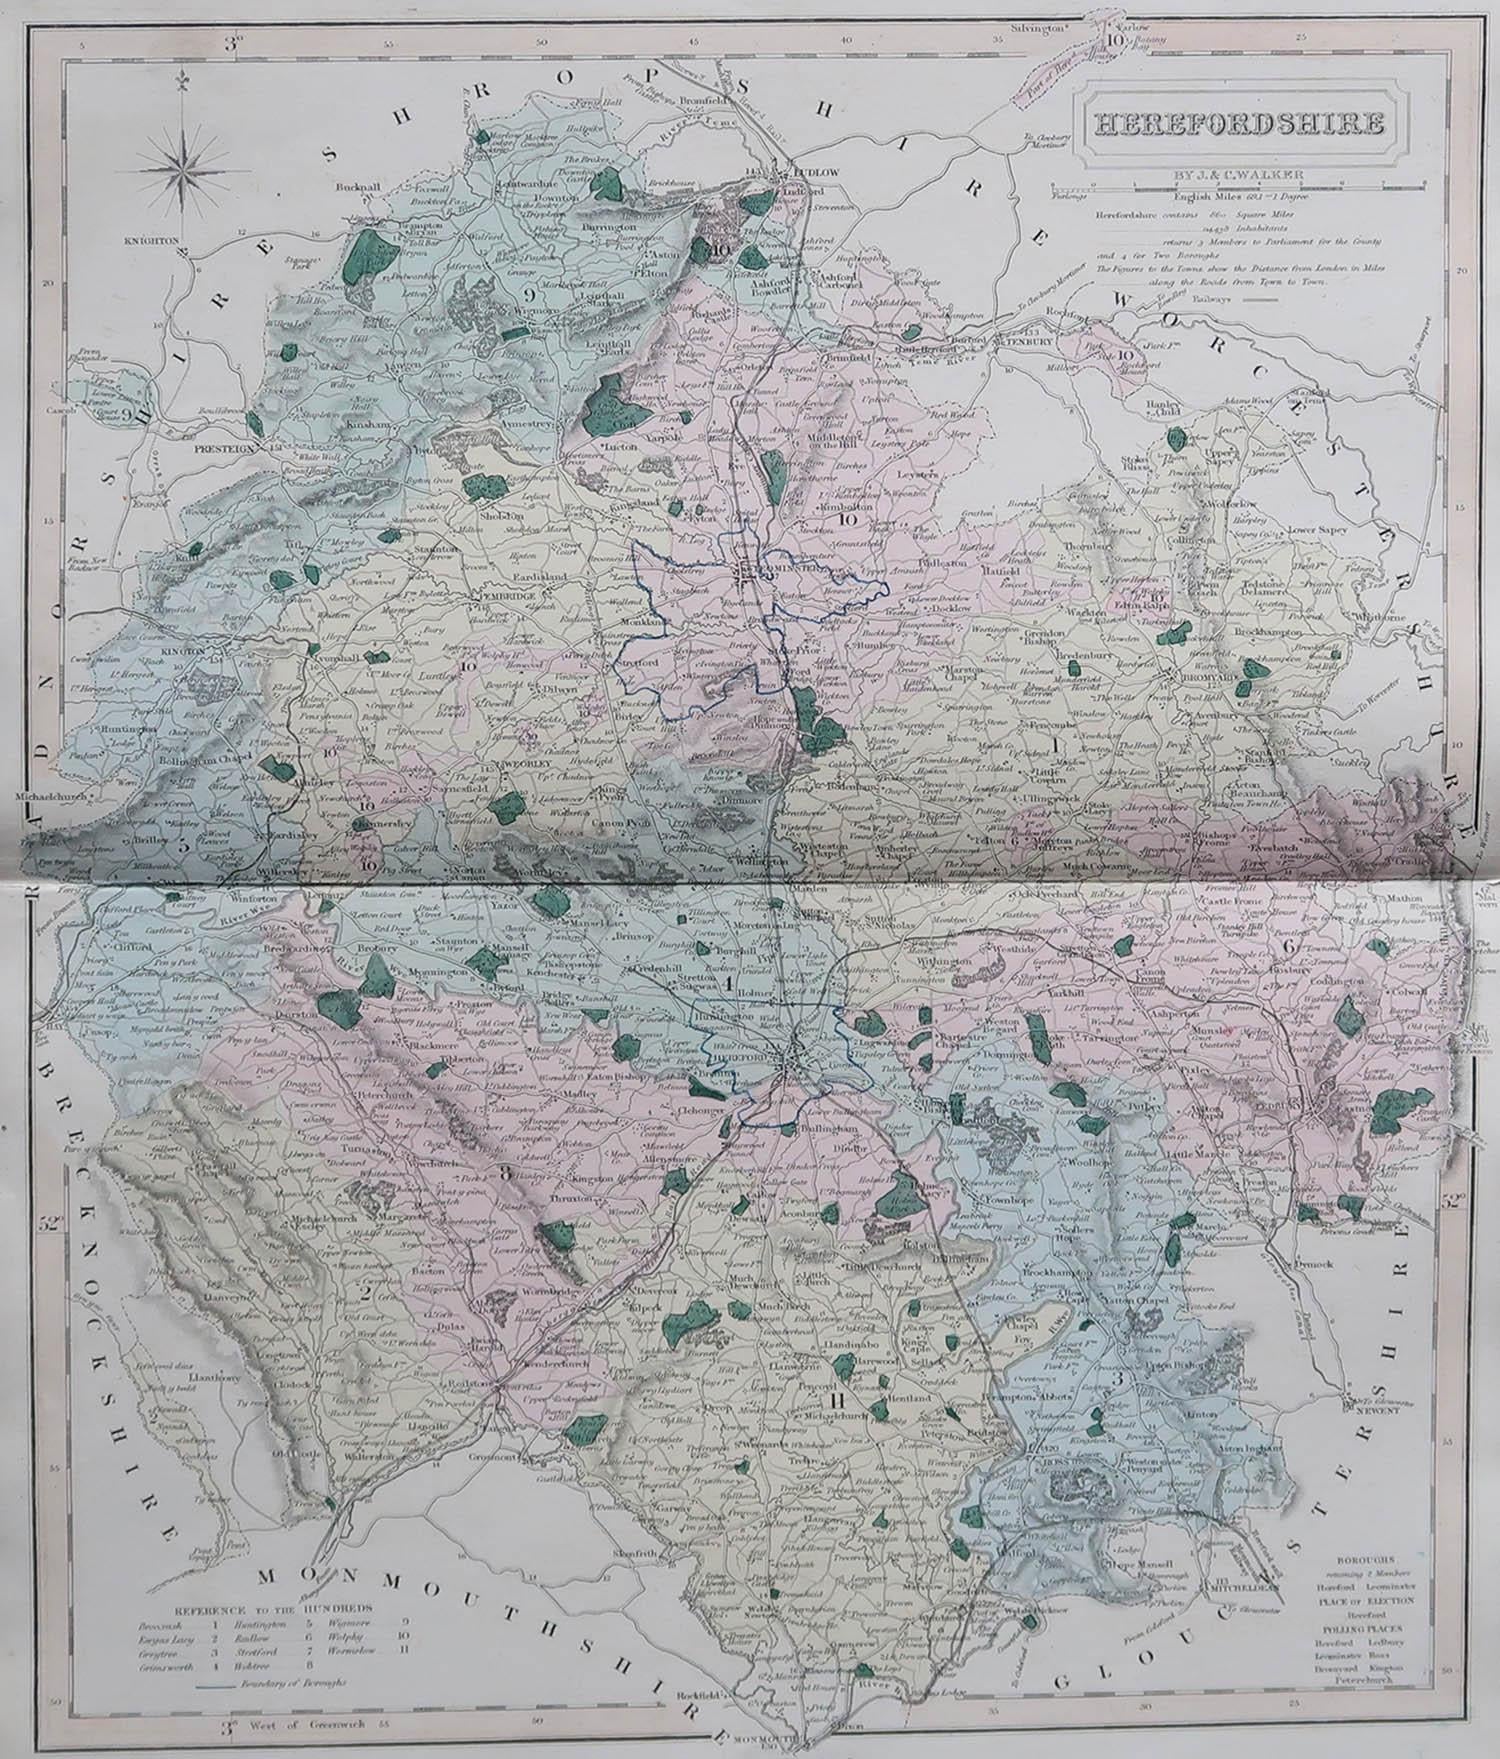 Great map of Herefordshire

Original colour

By J & C Walker

Published by Longman, Rees, Orme, Brown & Co. 1851

Unframed.




